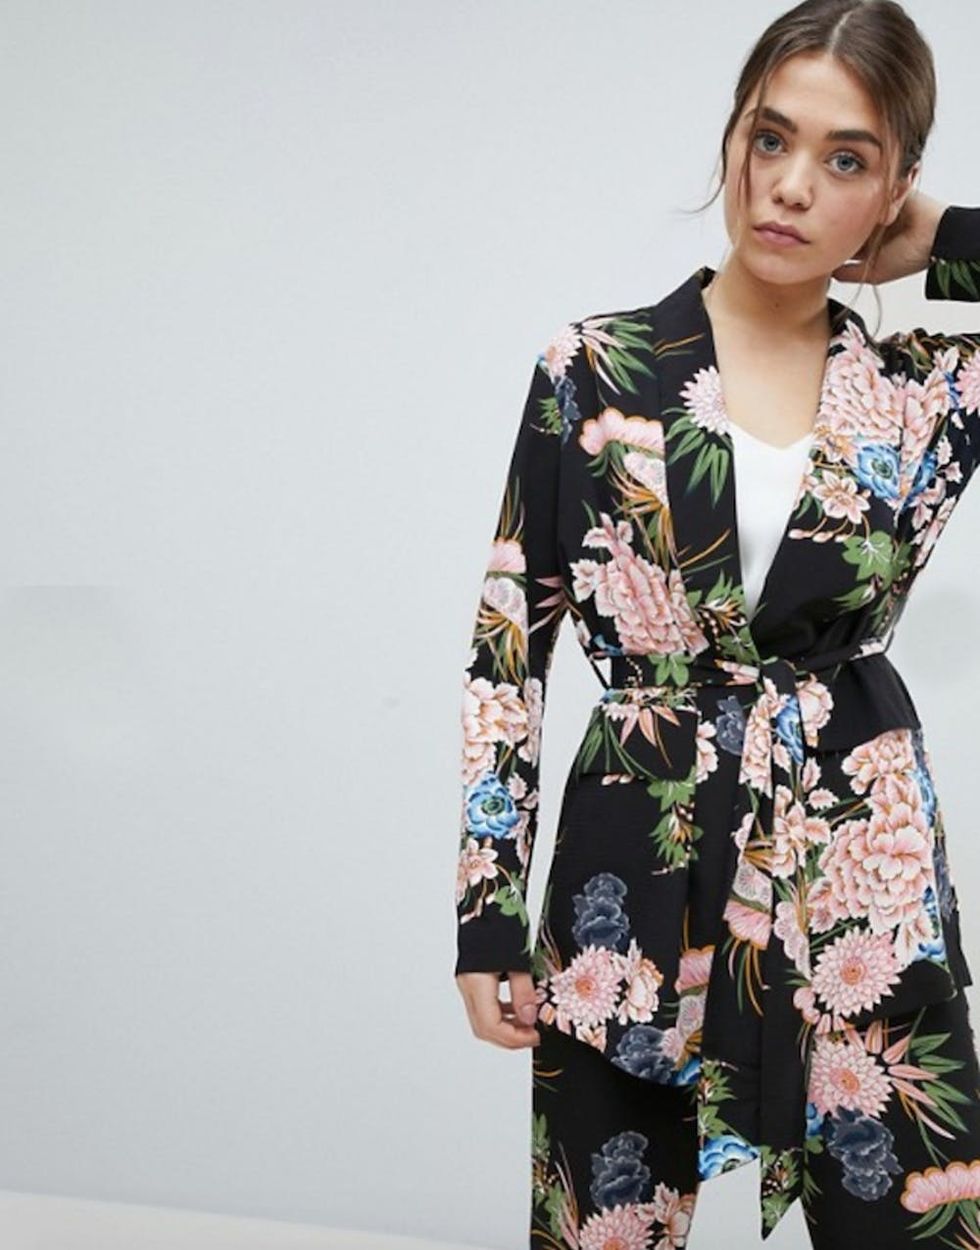 15 Grown-Up Floral Outfits to Update Your Spring Wardrobe - Brit + Co